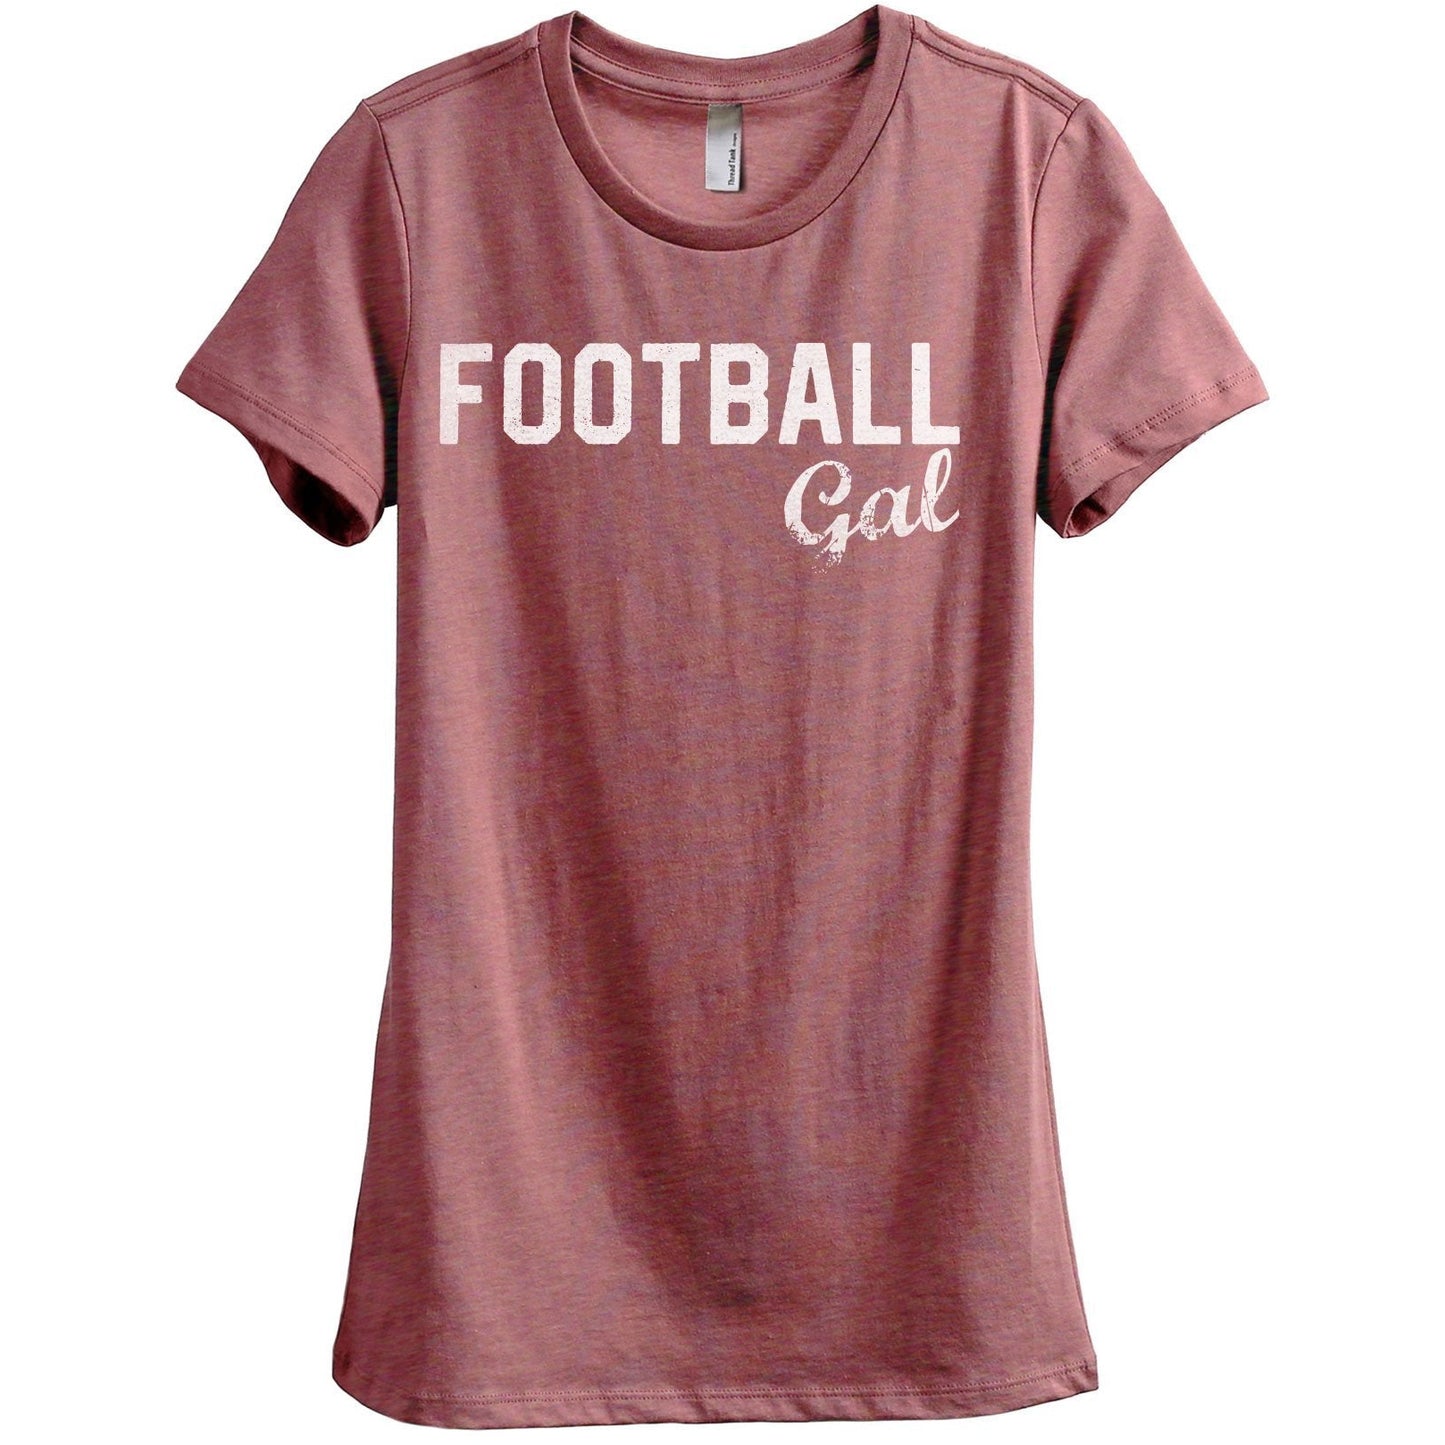 Football Gal Women's Relaxed Crewneck T-Shirt Top Tee Heather Rouge